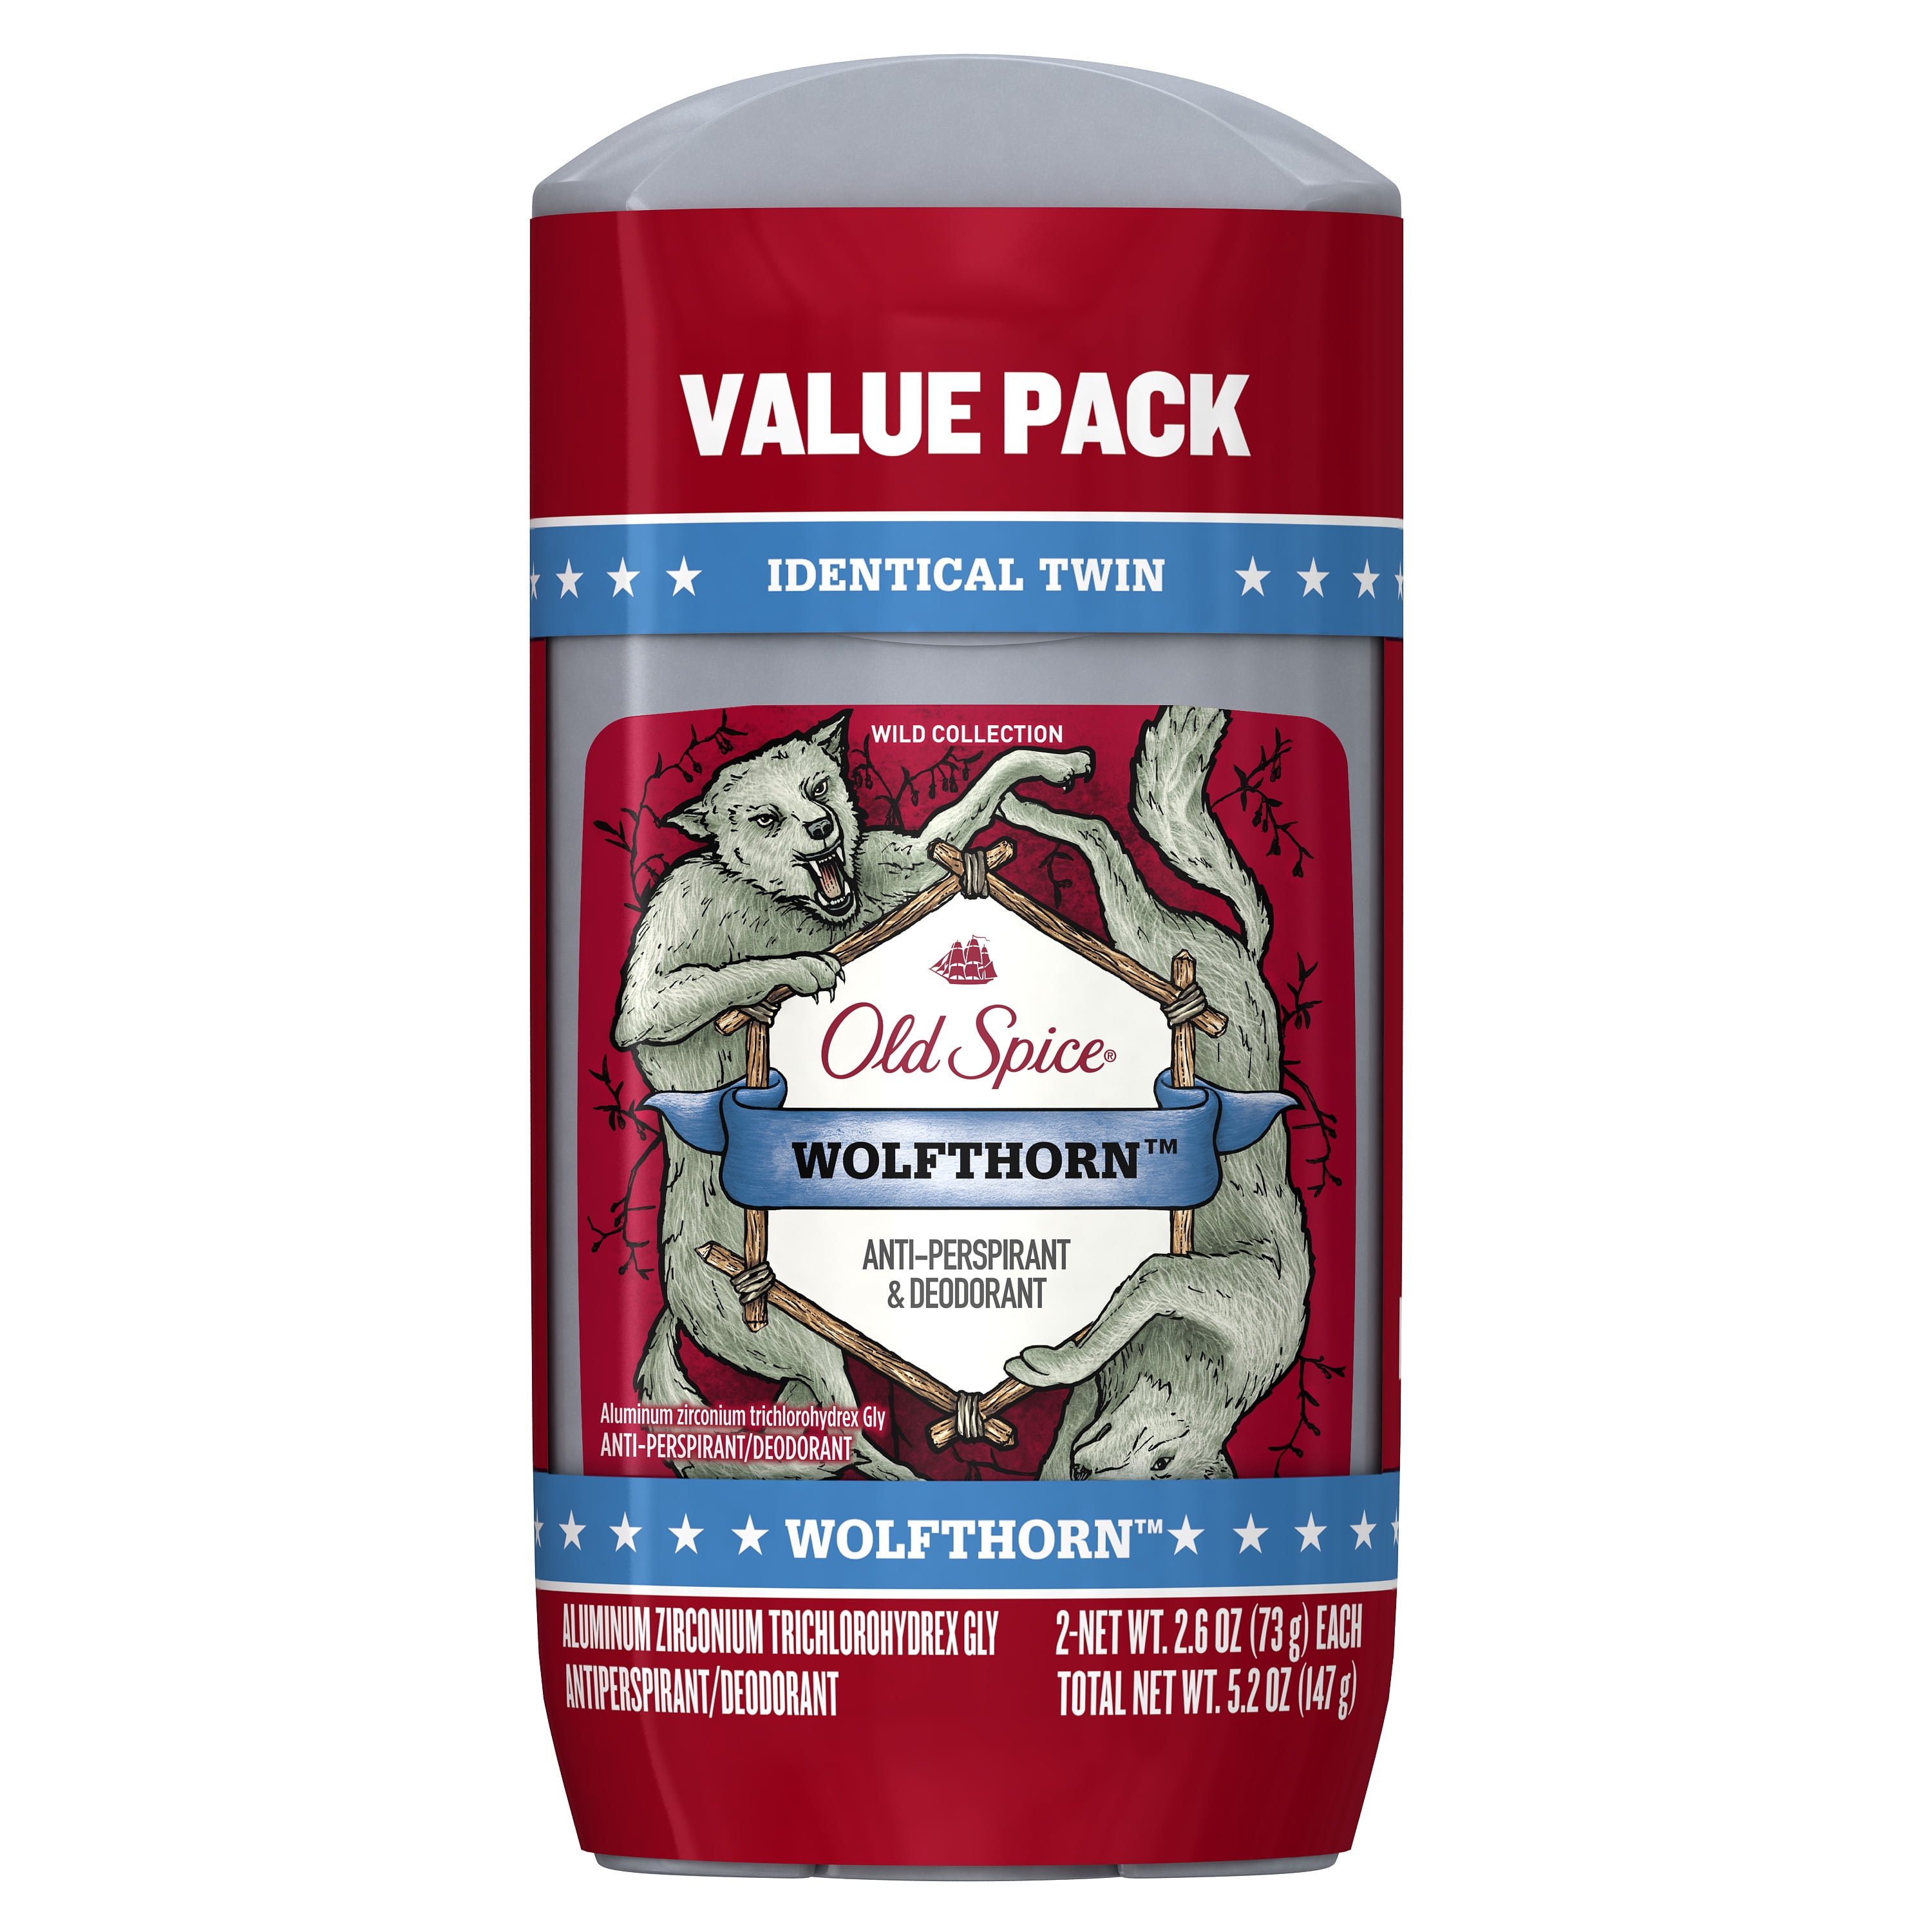 Wild collection. Old Spice Wolfthorn дезодорант. Old Spice Wolfthorn шампунь.